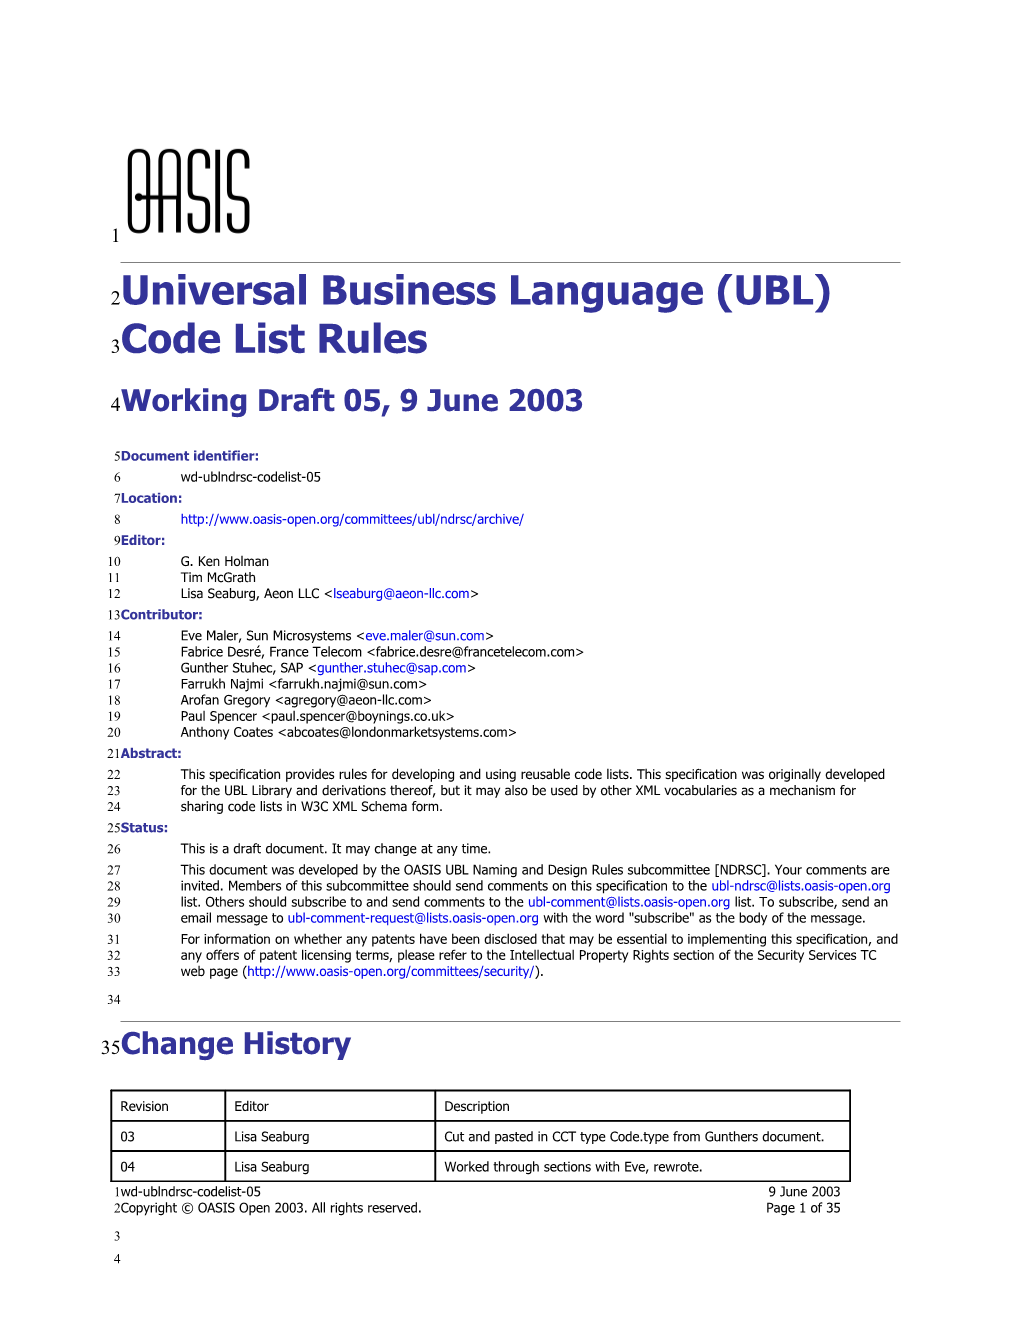 Universal Business Language (UBL) Code List Rules